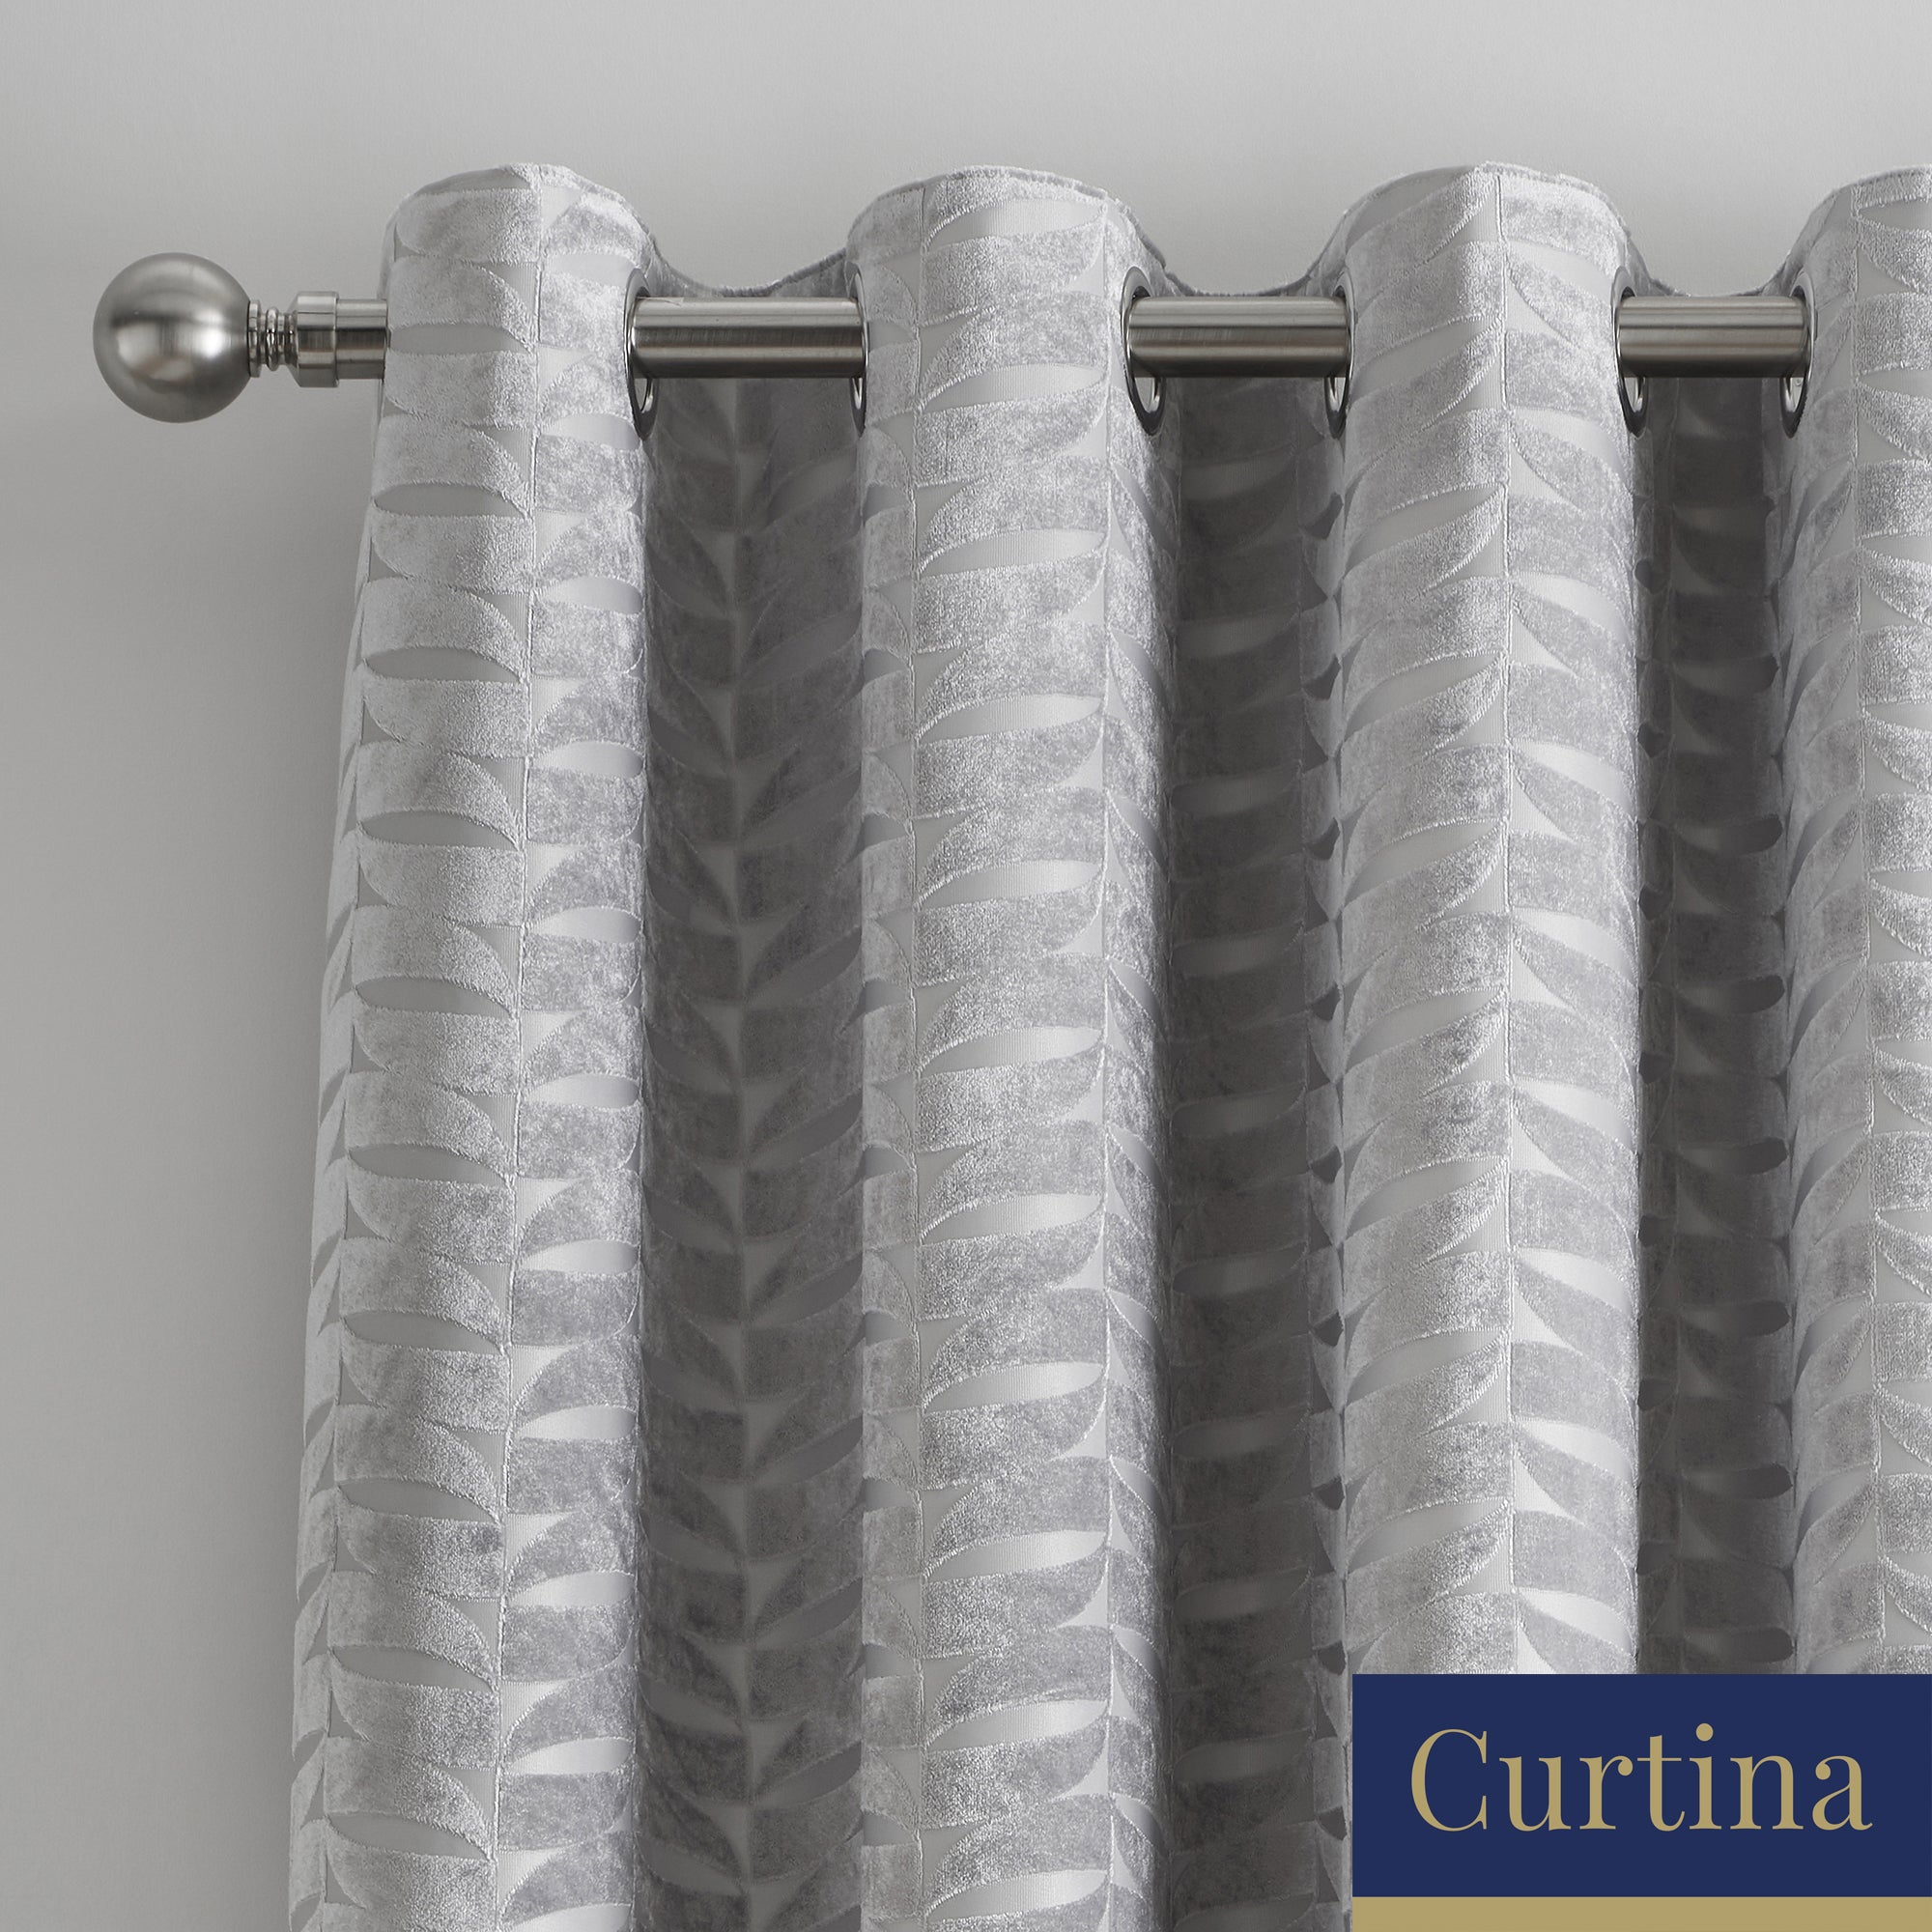 Kendal - Geometric Jacquard Eyelet Curtains in Silver - By Curtina